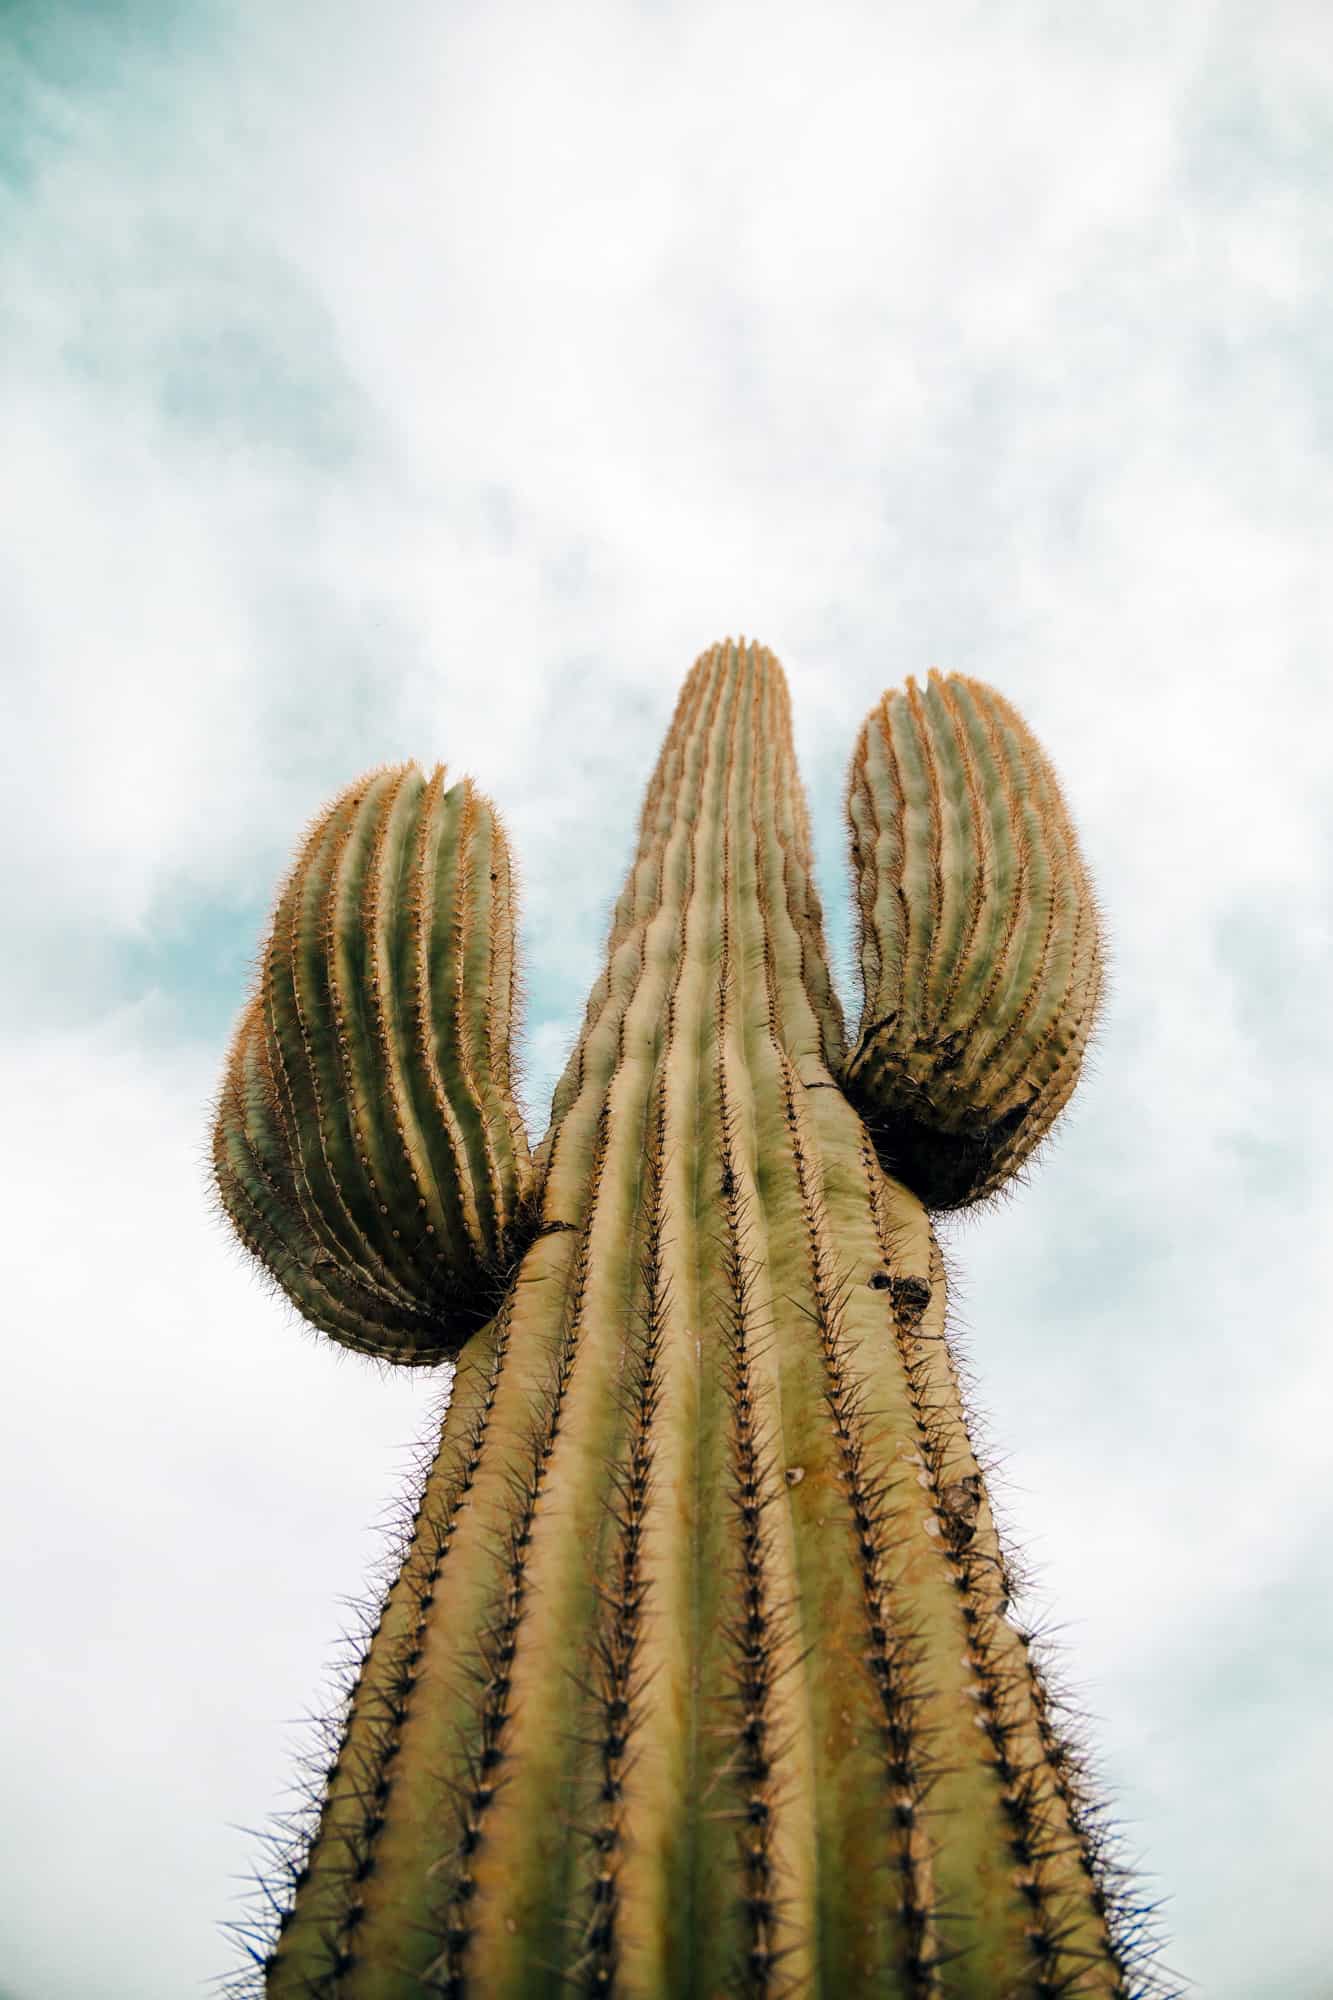 a saguaro cactus taken from down low looking up along the spine